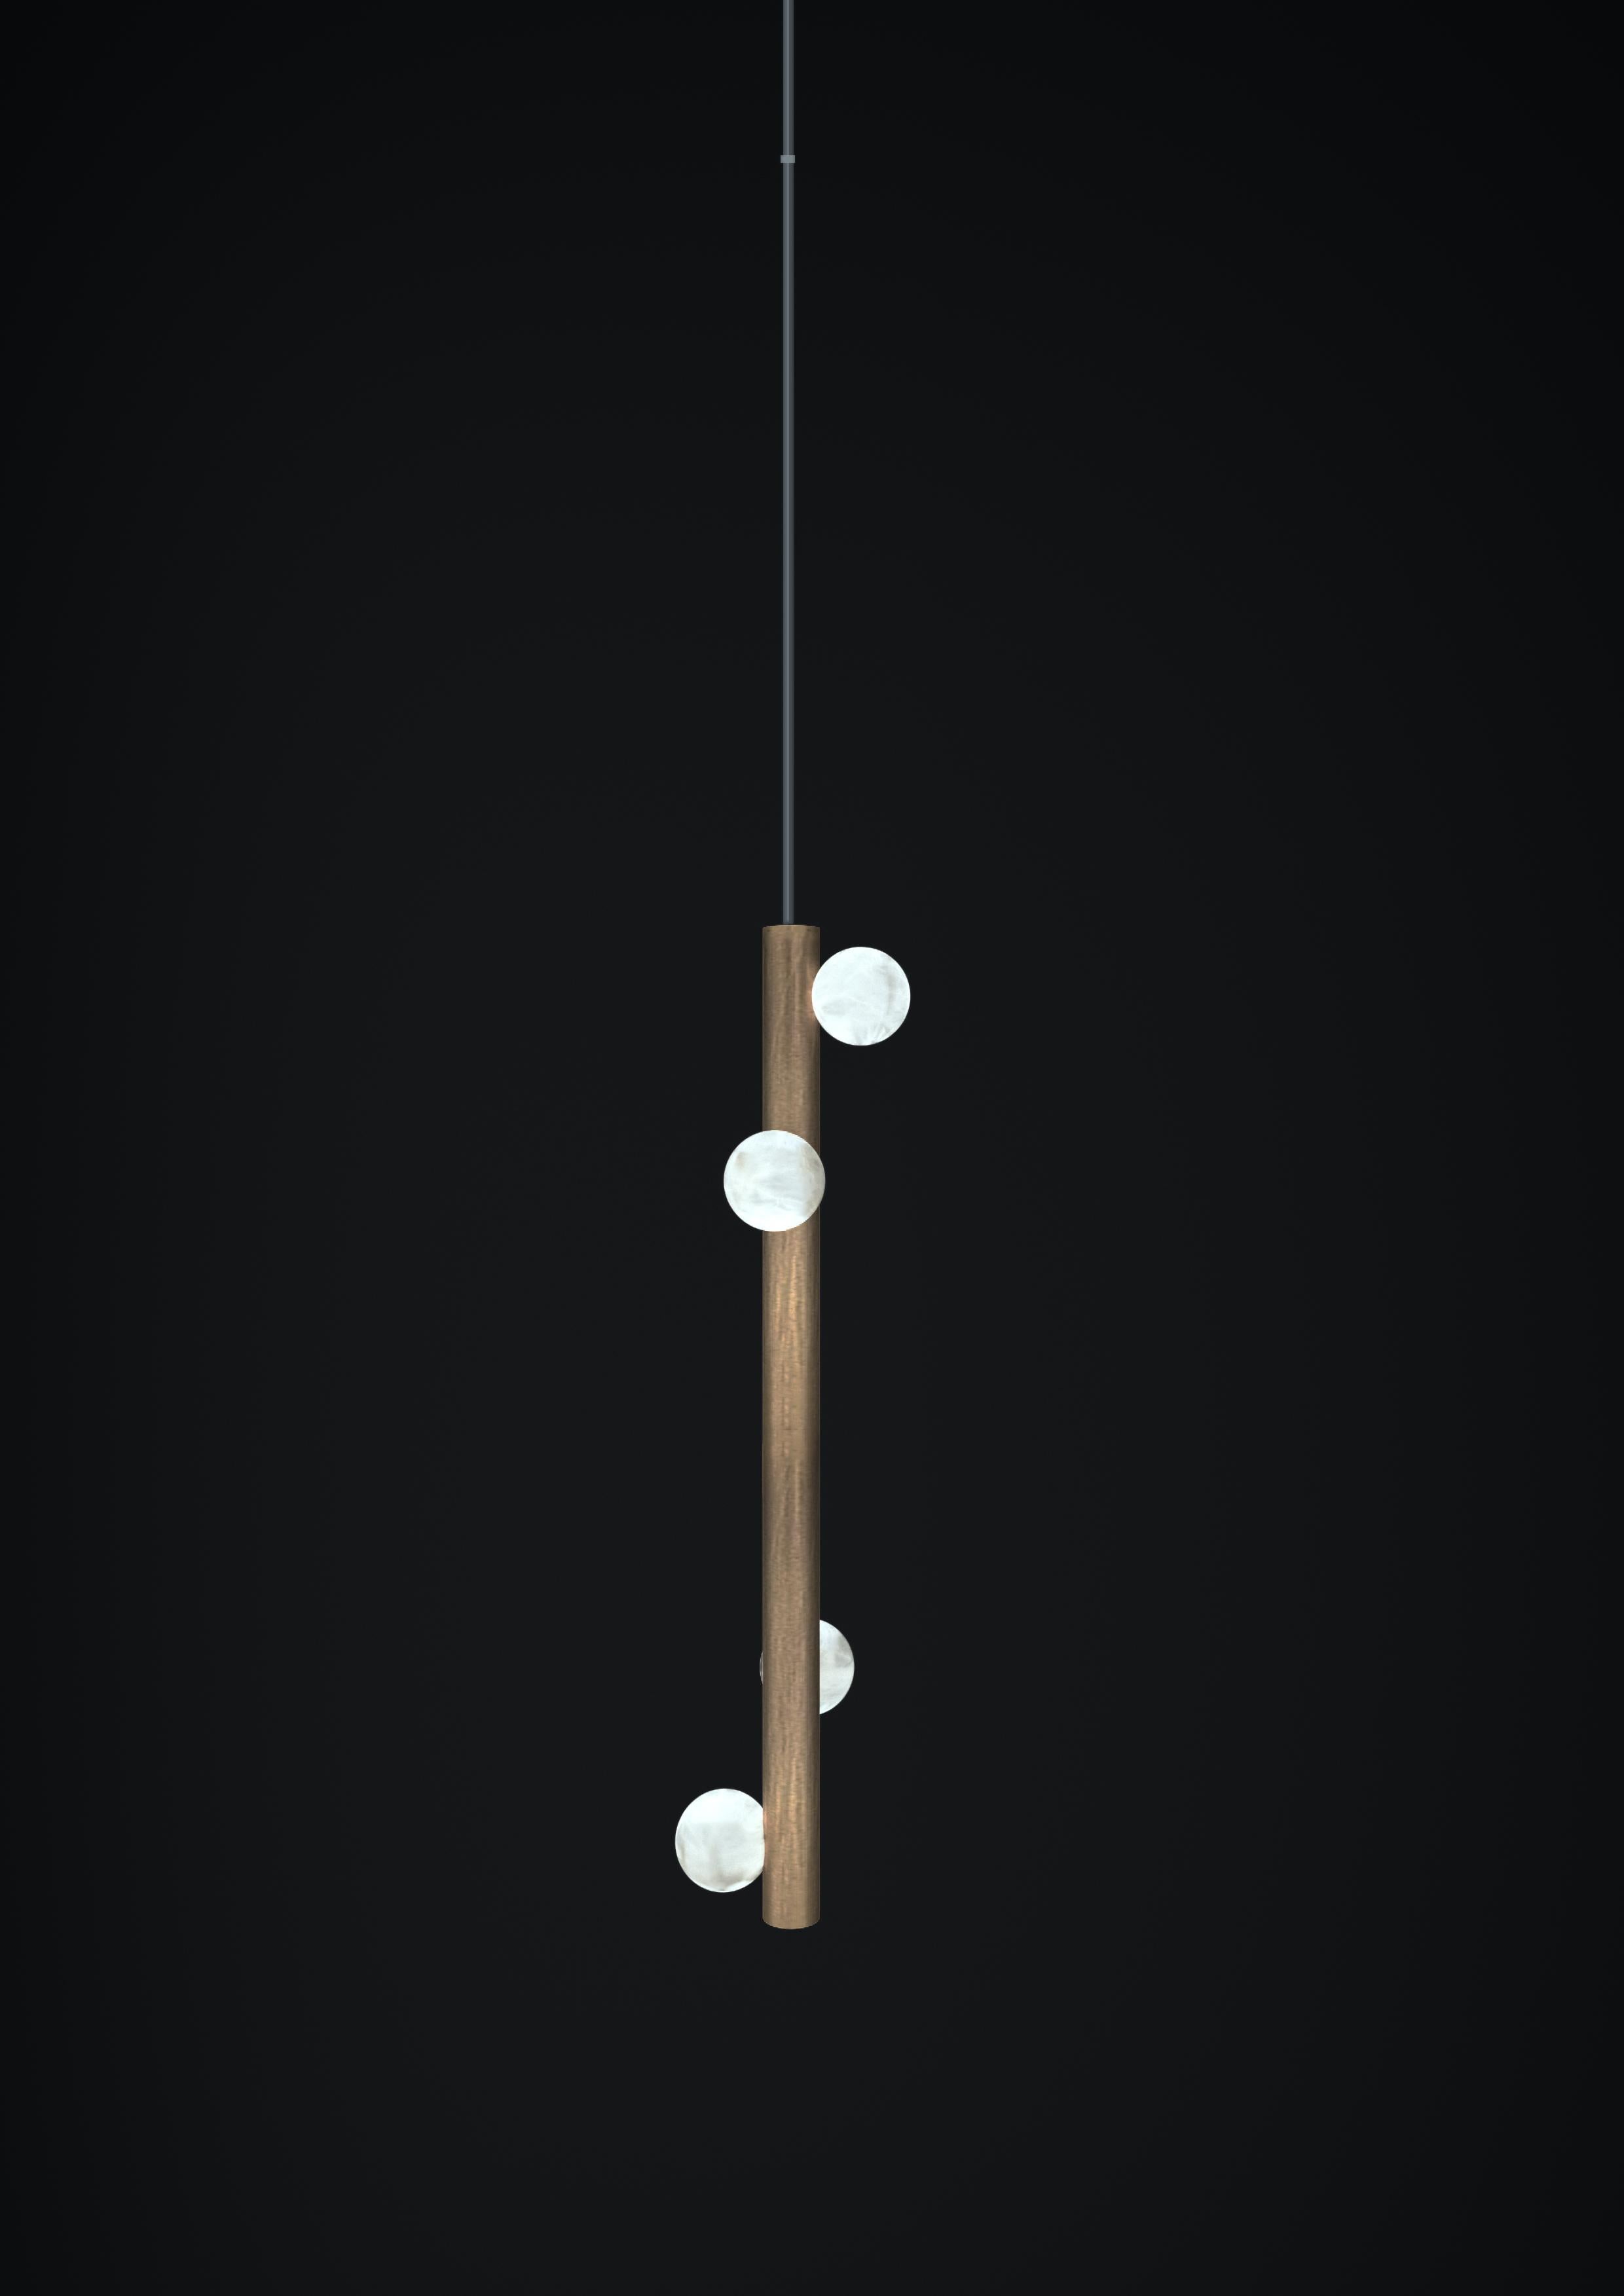 Demetra Brushed Burnished Metal Pendant Lamp 2 by Alabastro Italiano
Dimensions: D 12 x W 12 x H 60 cm.
Materials: White alabaster and metal.

Available in different finishes: Shiny Silver, Bronze, Brushed Brass, Ruggine of Florence, Brushed